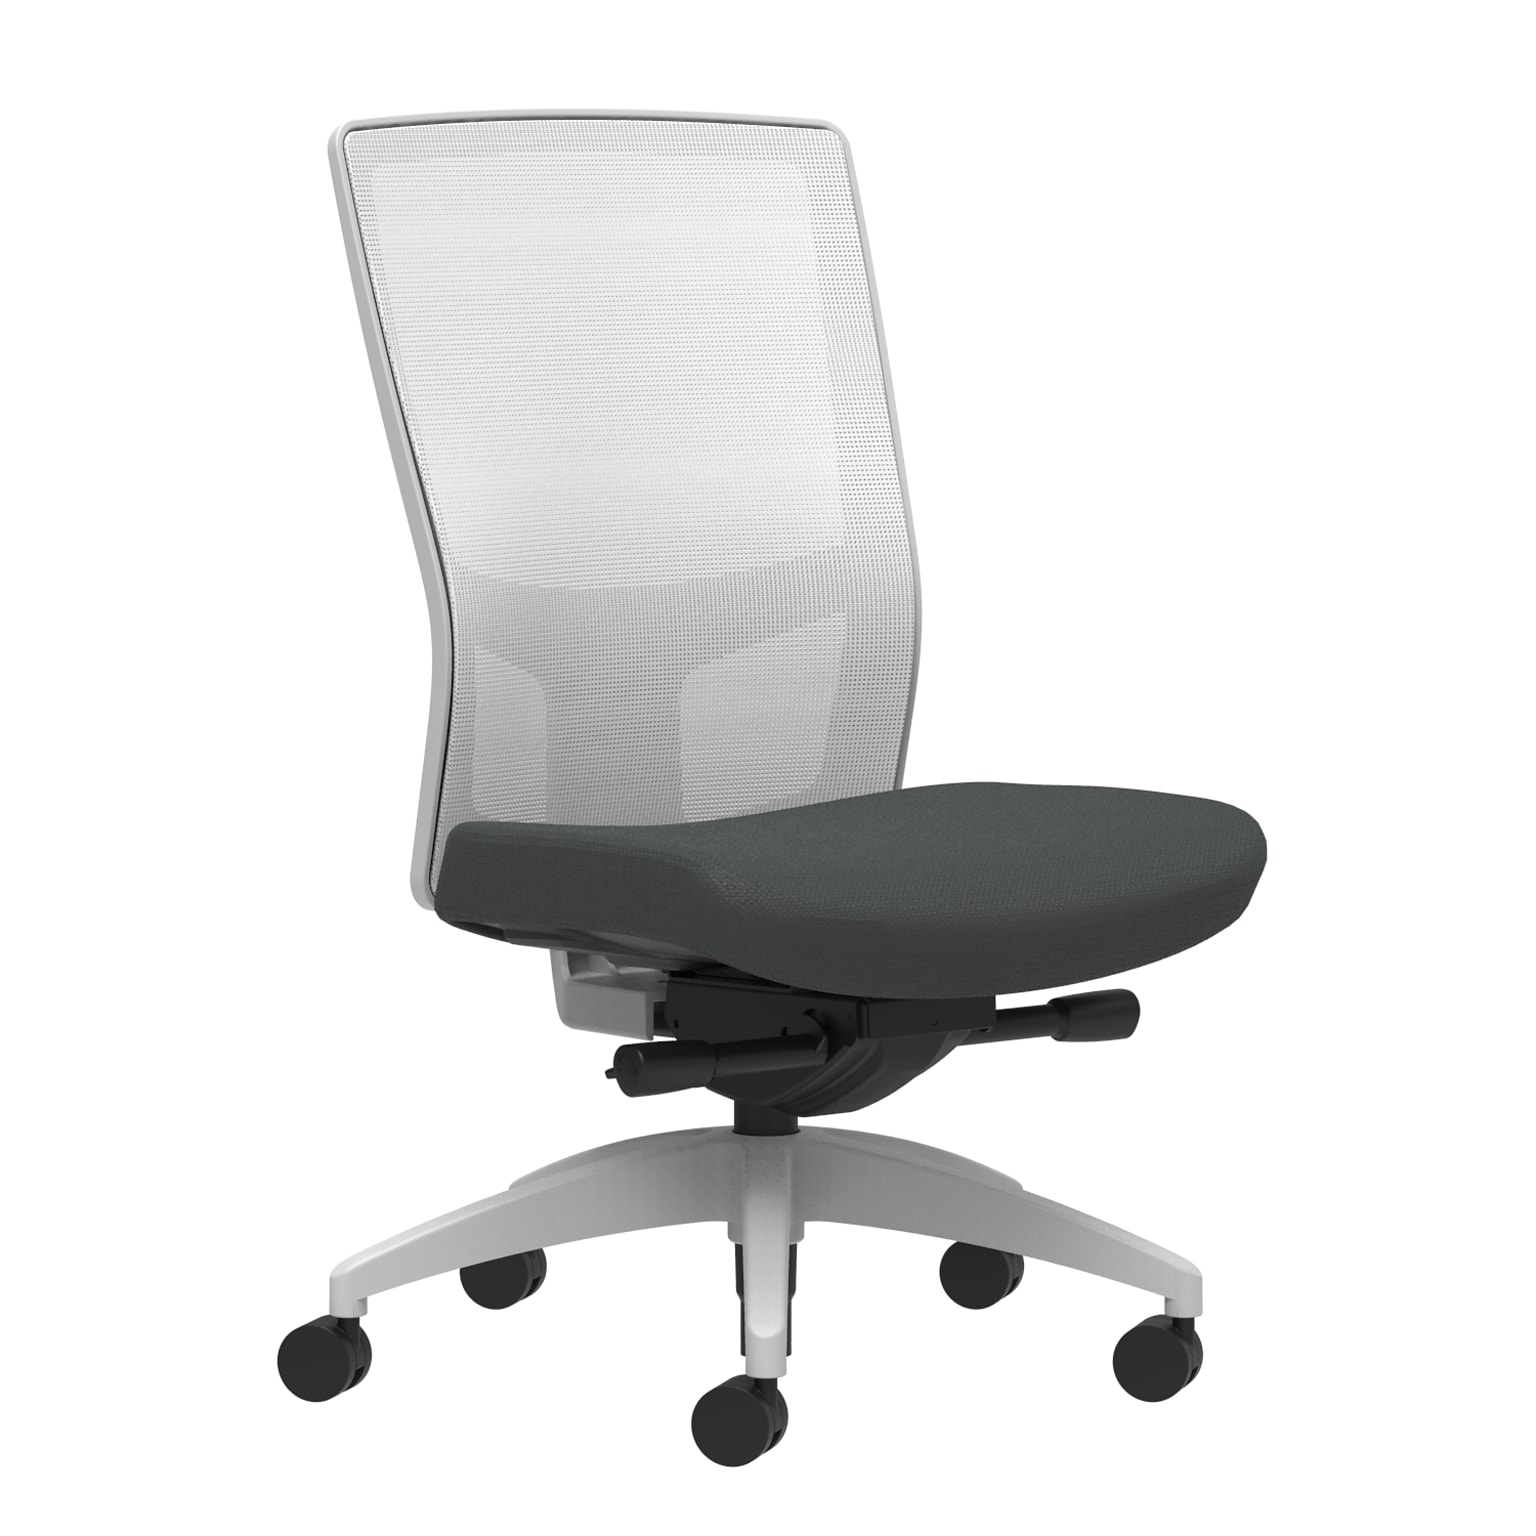 Union & Scale Workplace2.0™ Fabric Task Chair, Iron Ore, Integrated Lumbar, Armless, Advanced Synchro-Tilt Seat Control (53570)